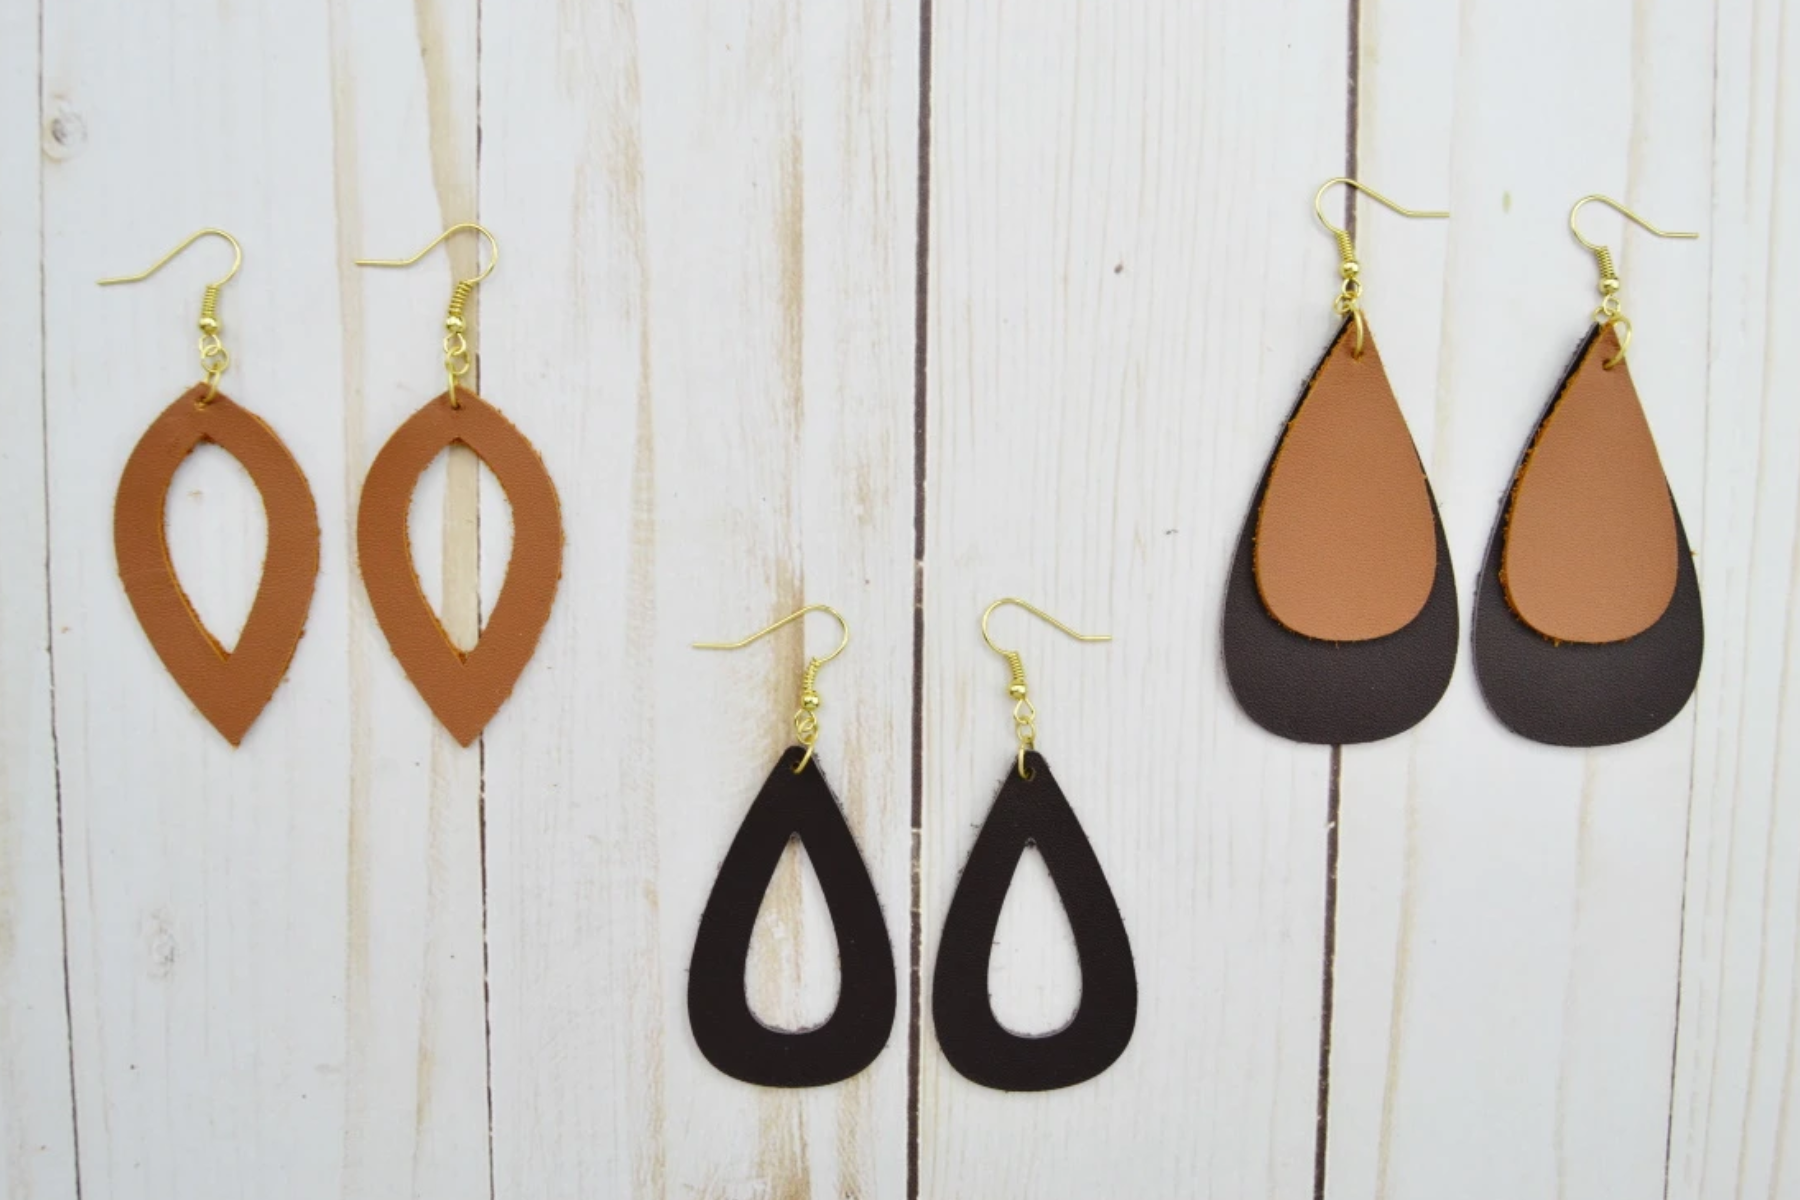 Three distinct styles of leather earrings on a wooden base